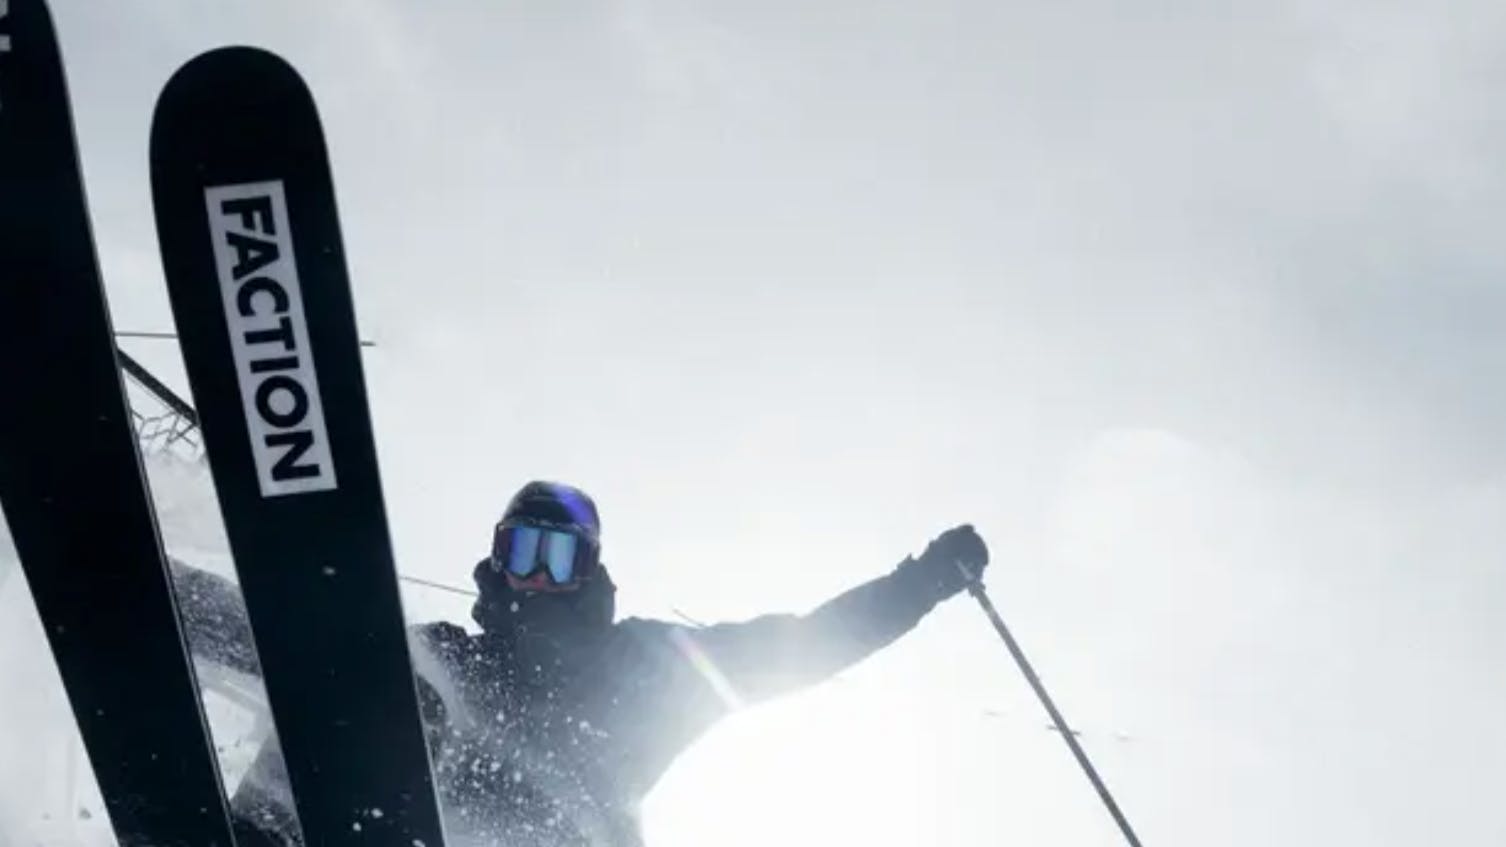 A skier on Faction skis.